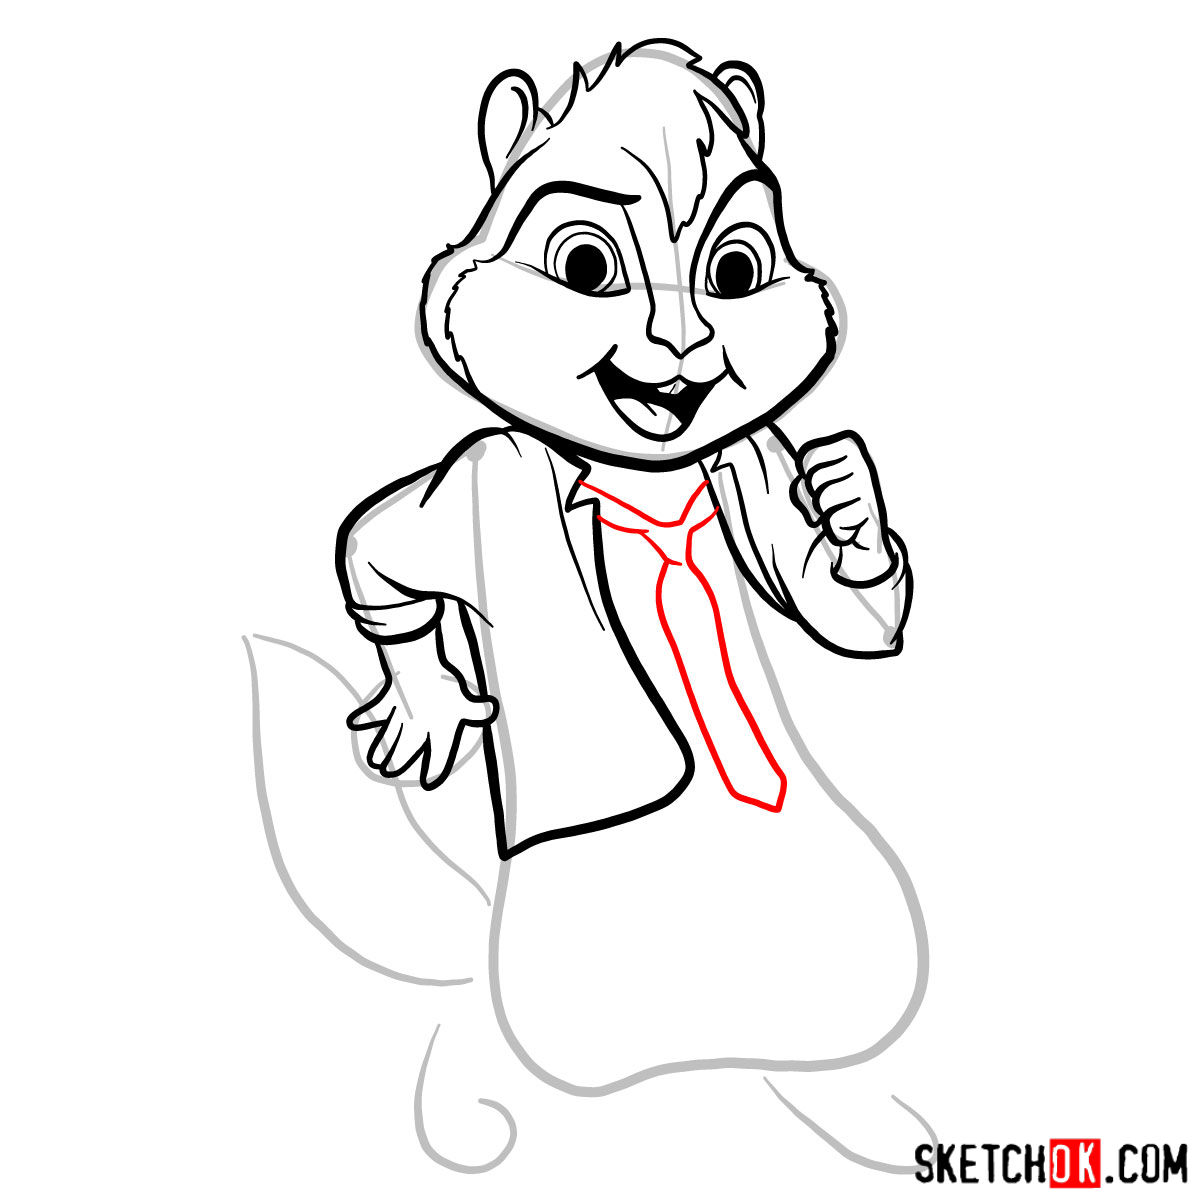 How to draw Alvin the Chipmunk Sketchok easy drawing guides